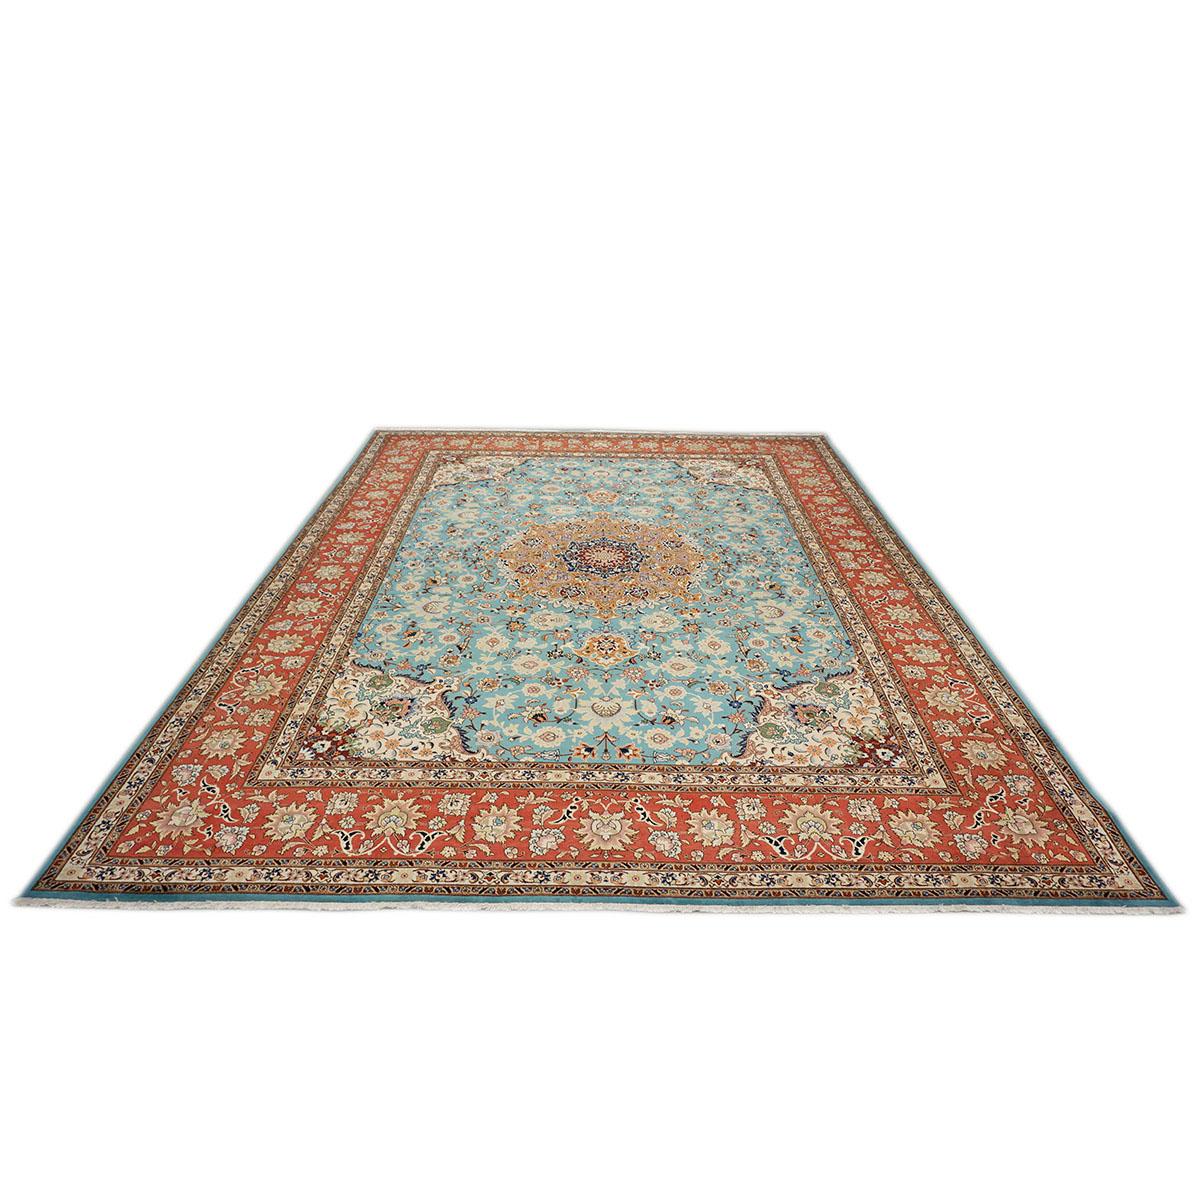 Ashly Fine Rugs presents a 1940s Antique Persian Tabriz. Tabriz is a northern city in modern-day Iran and has forever been famous for the fineness and craftsmanship of its handmade rugs. This piece has a beautiful light blue and ivory background